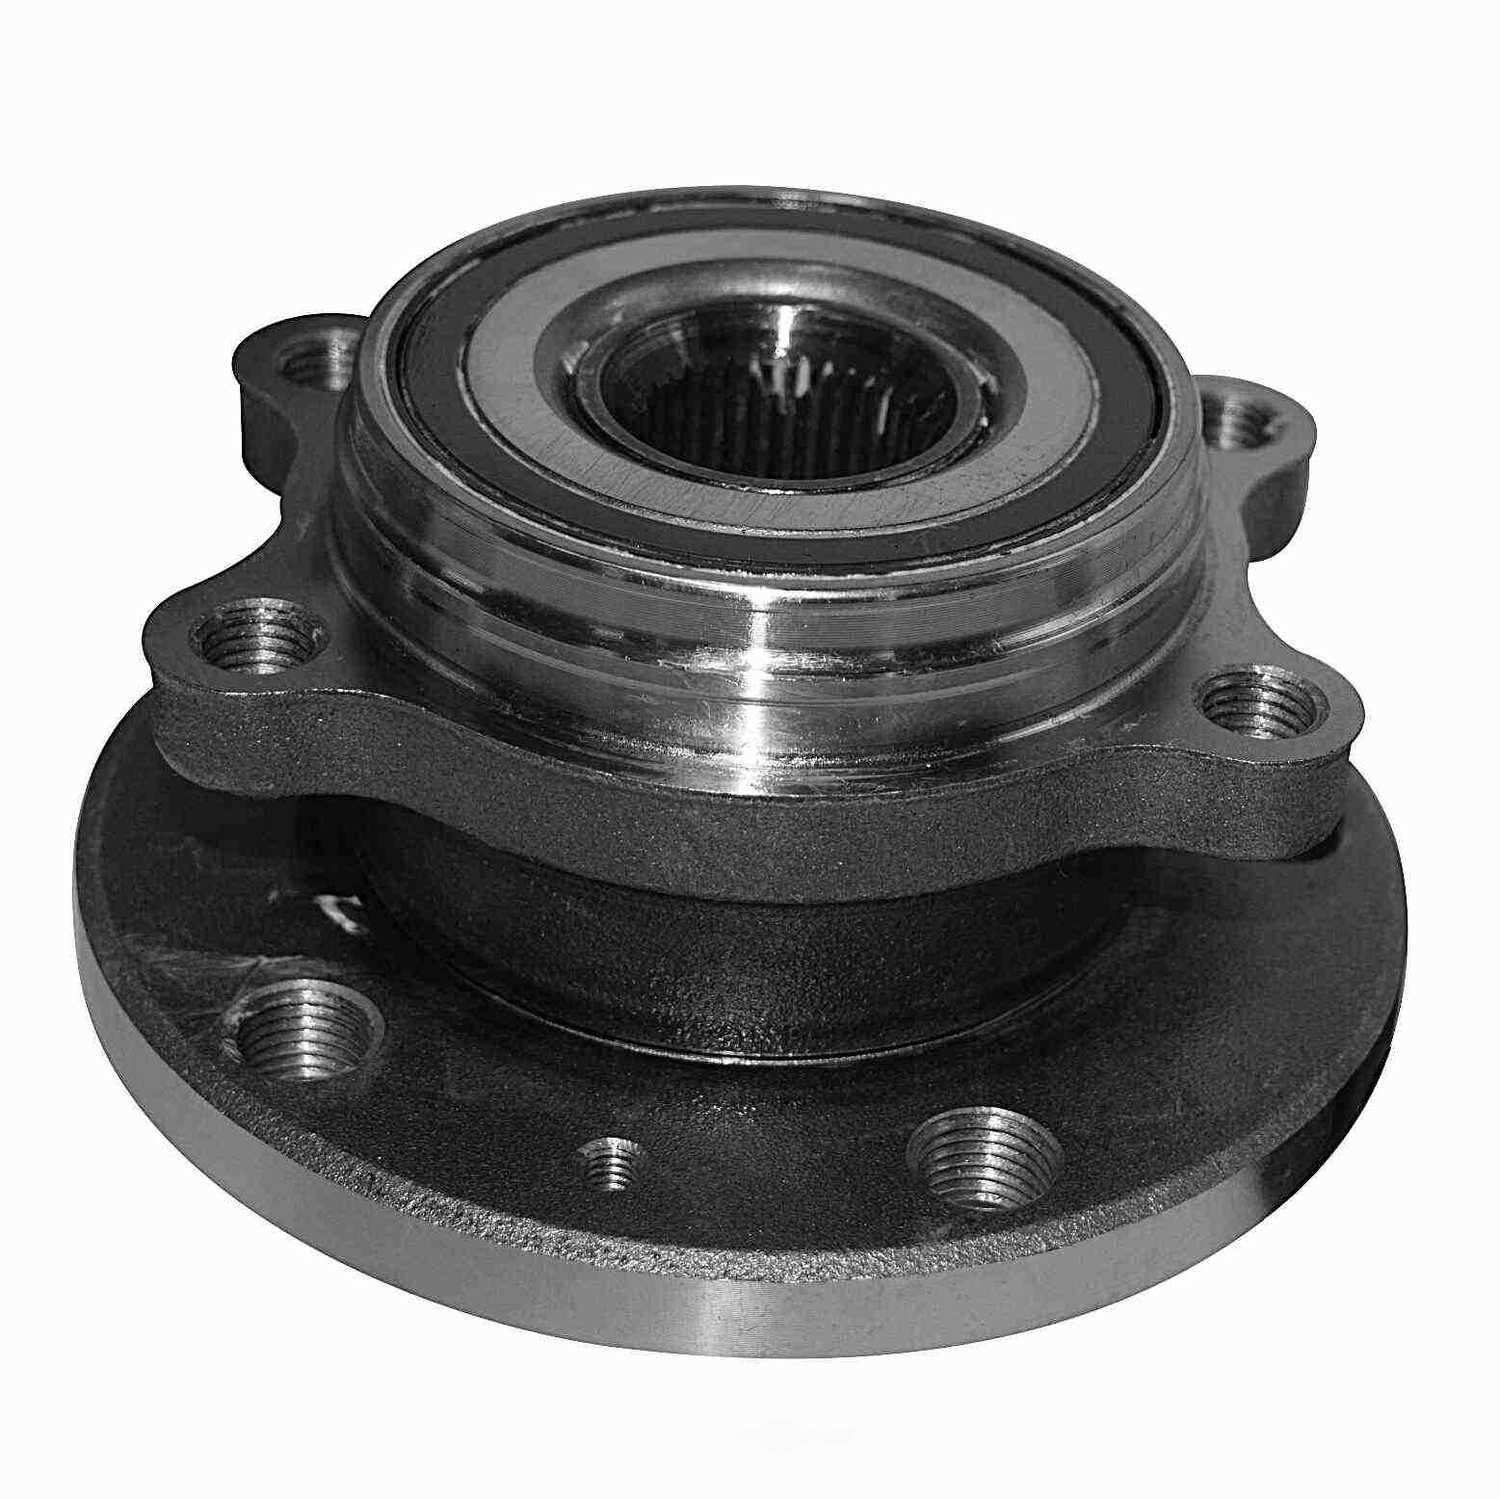 GSP NORTH AMERICA INC. - GSP New Wheel Bearing and Hub Assembly (Front) - AD8 234253